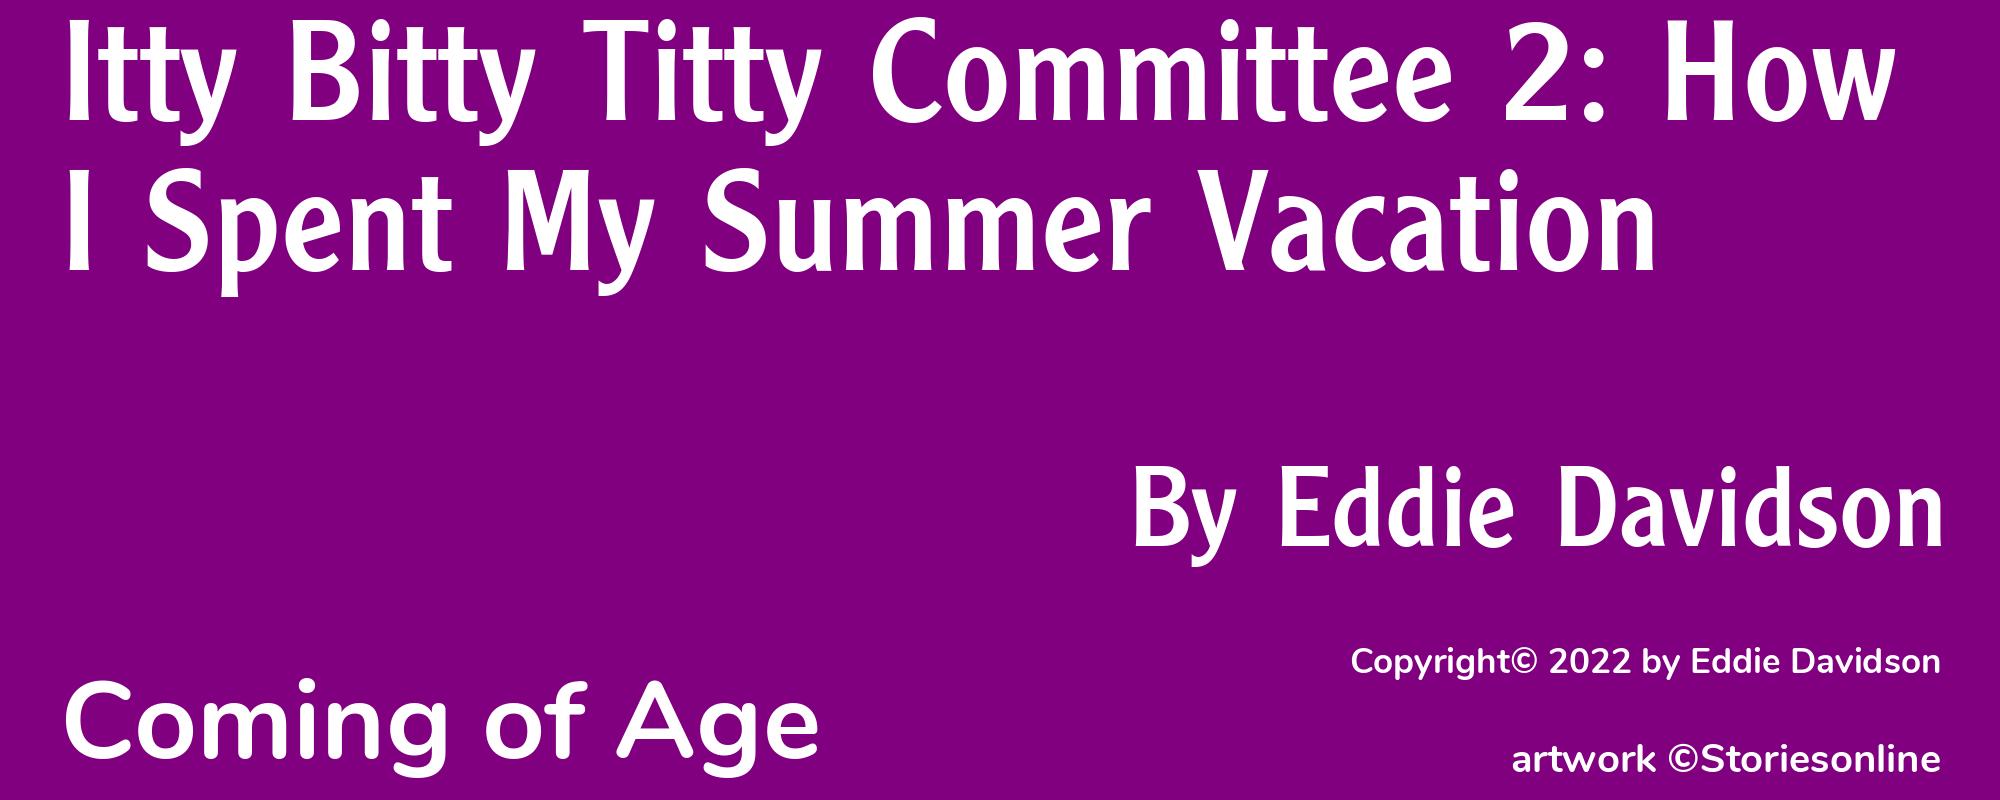 Itty Bitty Titty Committee 2: How I Spent My Summer Vacation - Cover